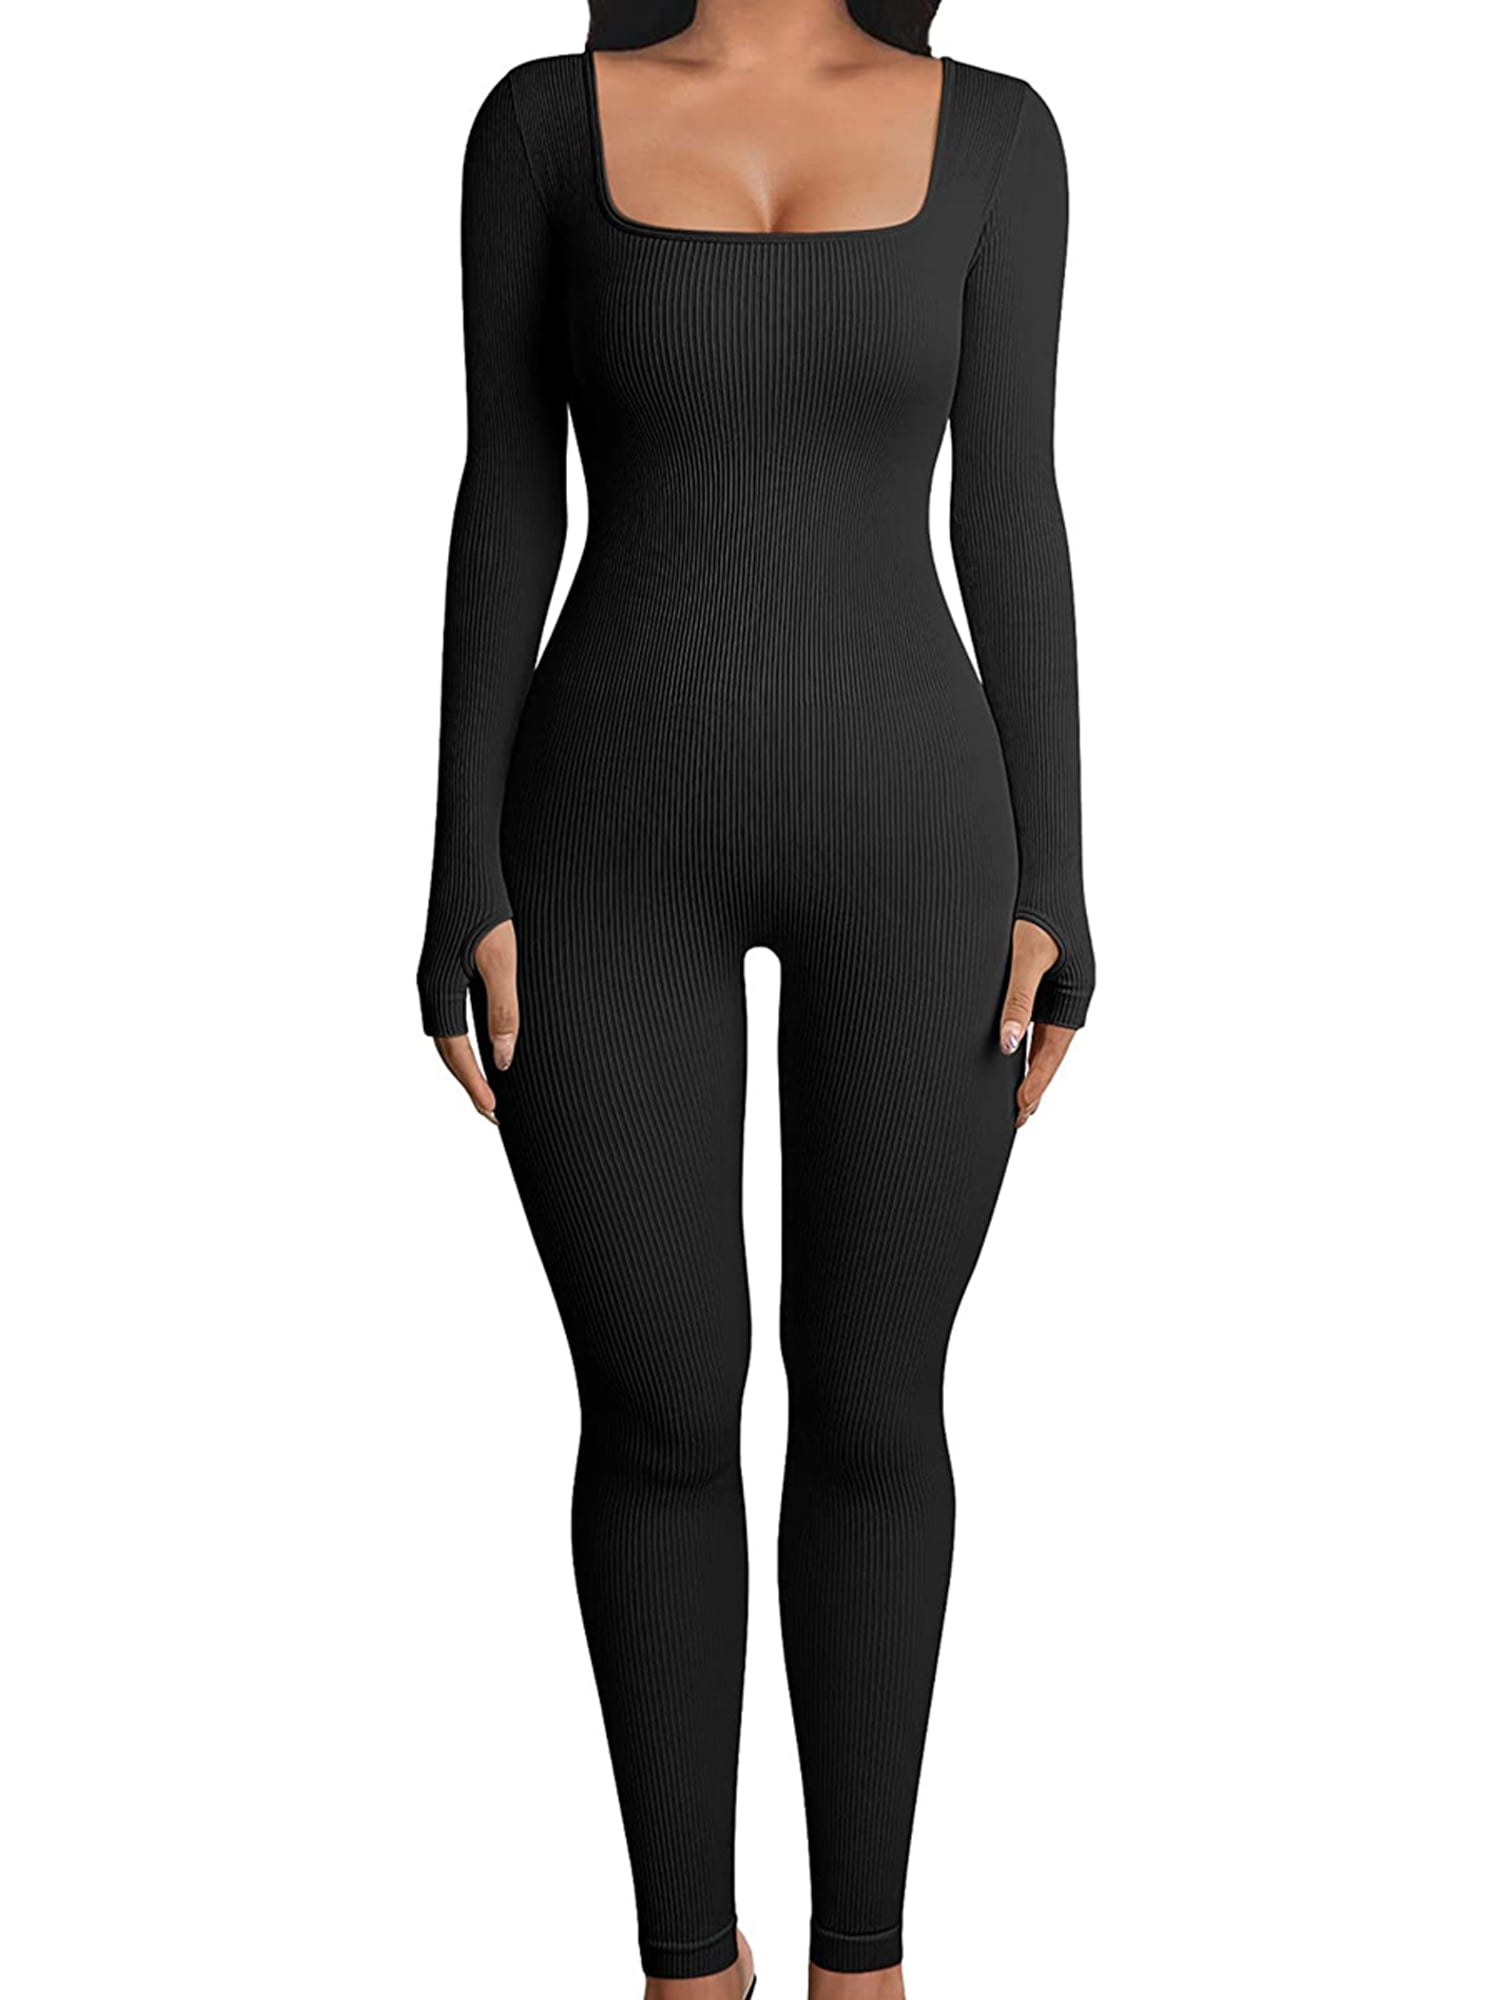 Xkwyshop Women Jumpsuits Bodycon Ribbed Knit Long SleeveOne Piece